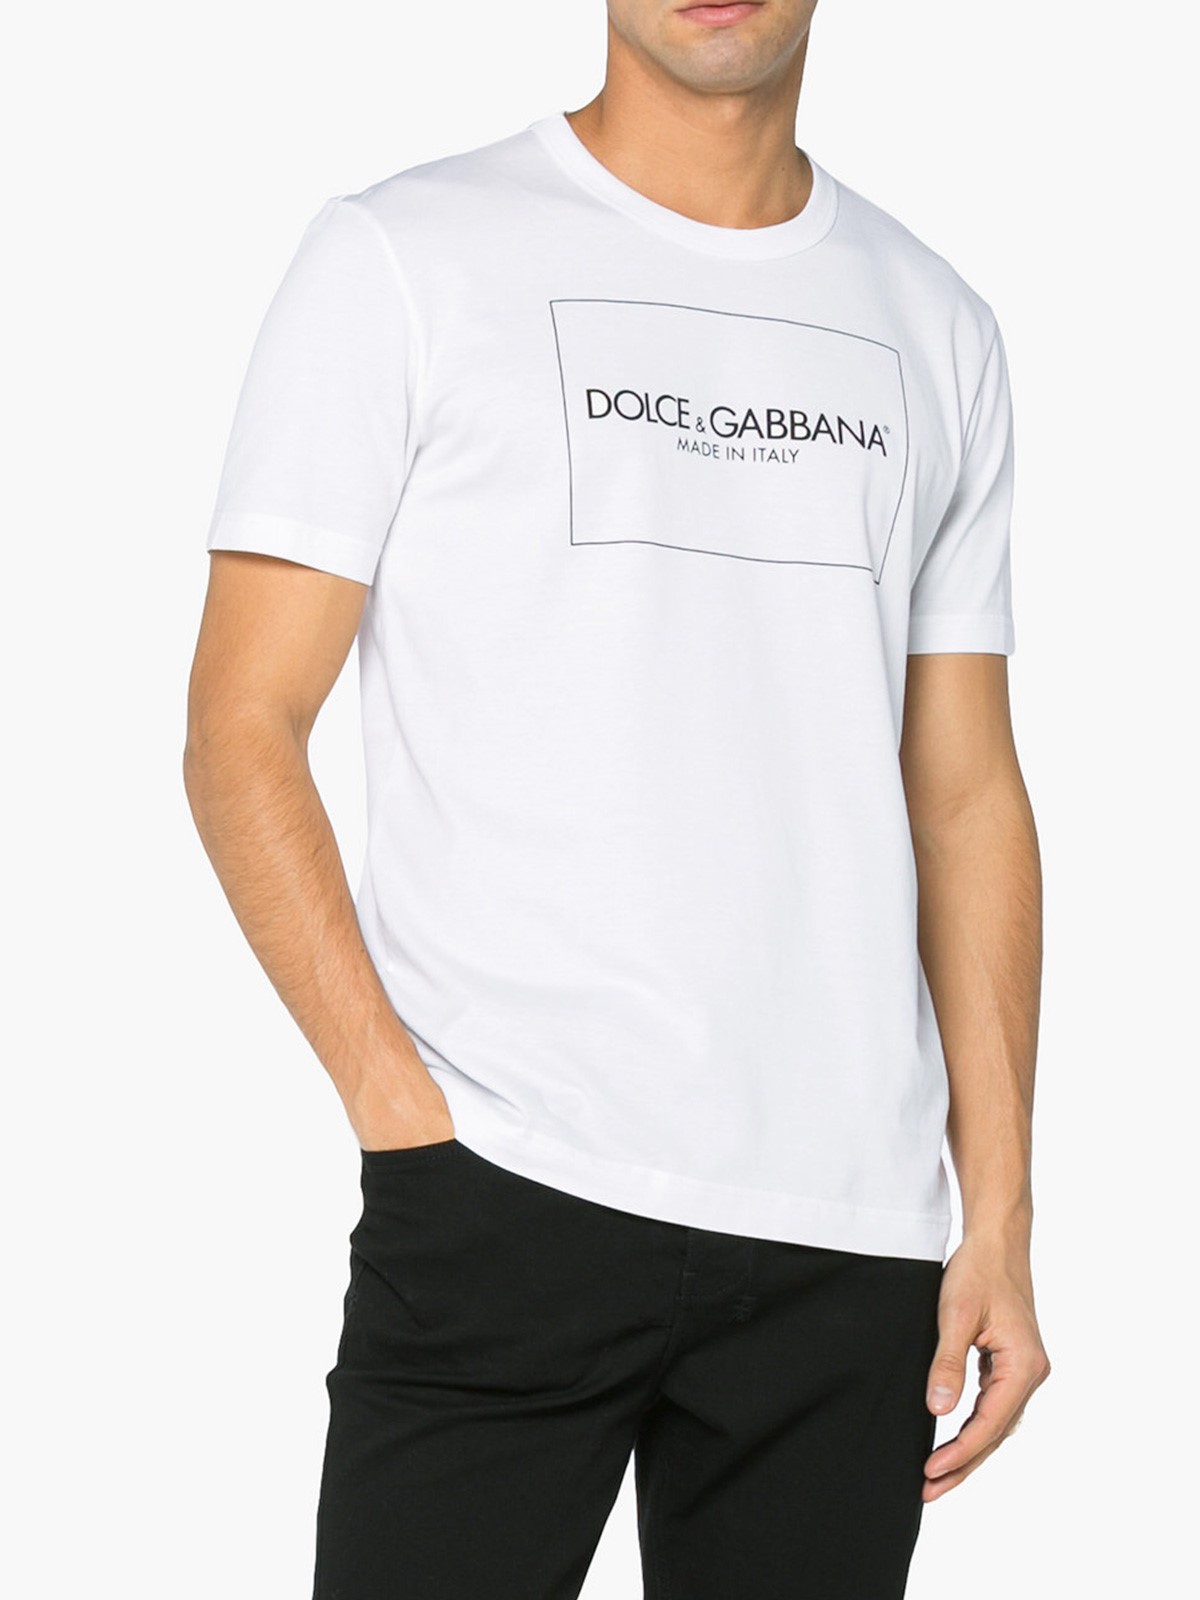 dolce & gabbana PRINTED LOGO T-SHIRT available on montiboutique 